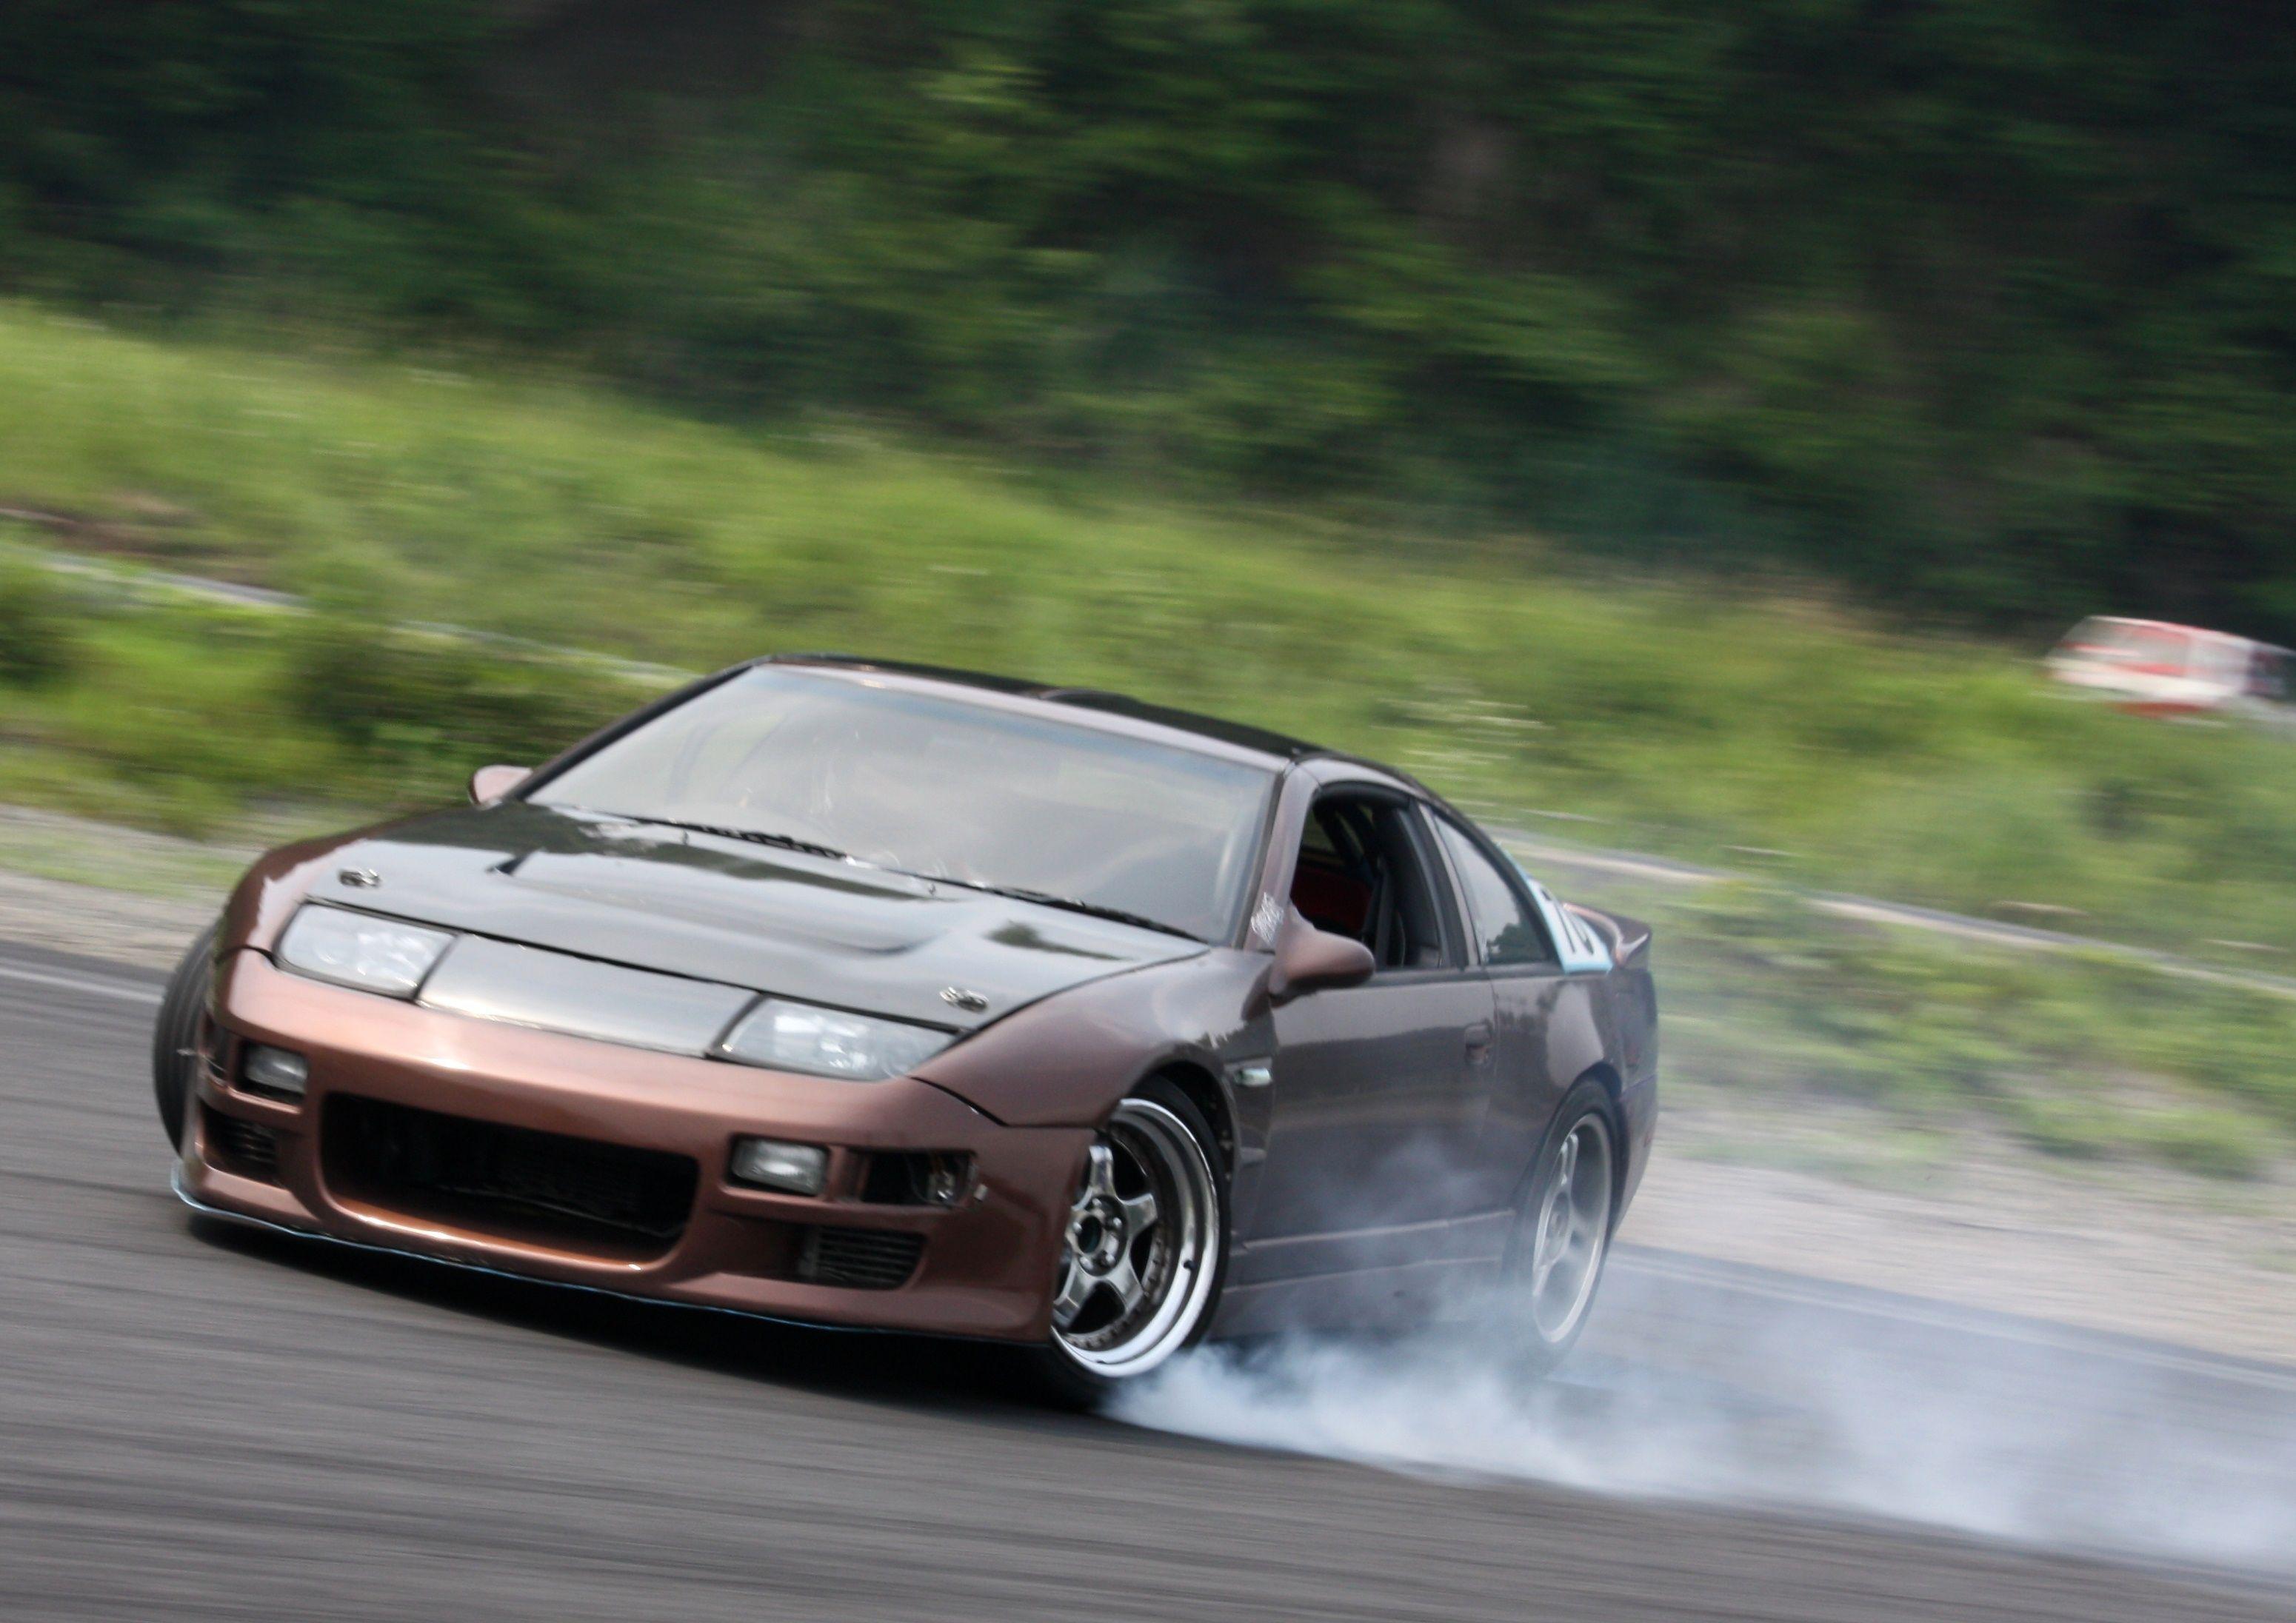 300zx Twin Turbo Wallpapers Wallpaper Cave